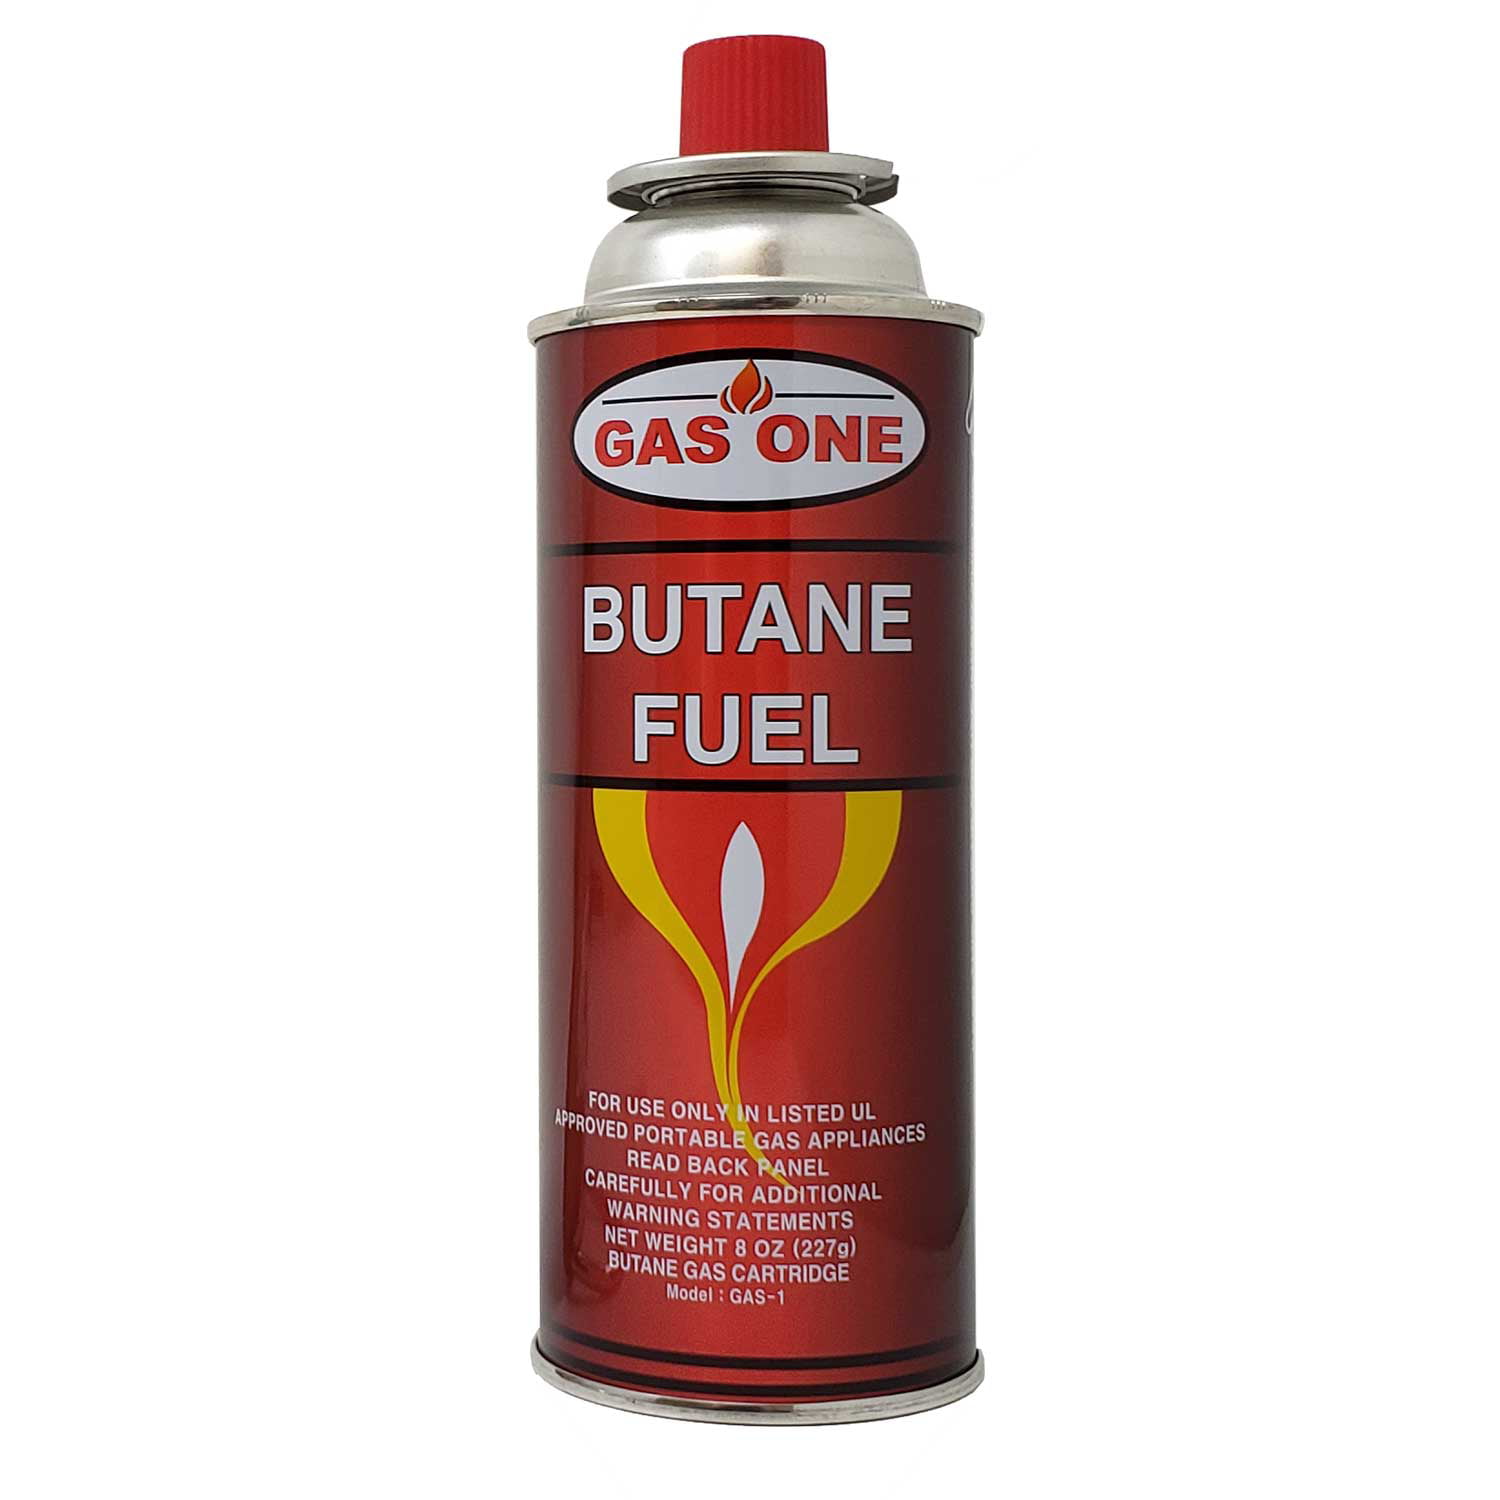 Butane Fuel Canisters For Portable Camping Stoves Gas Burners Ul